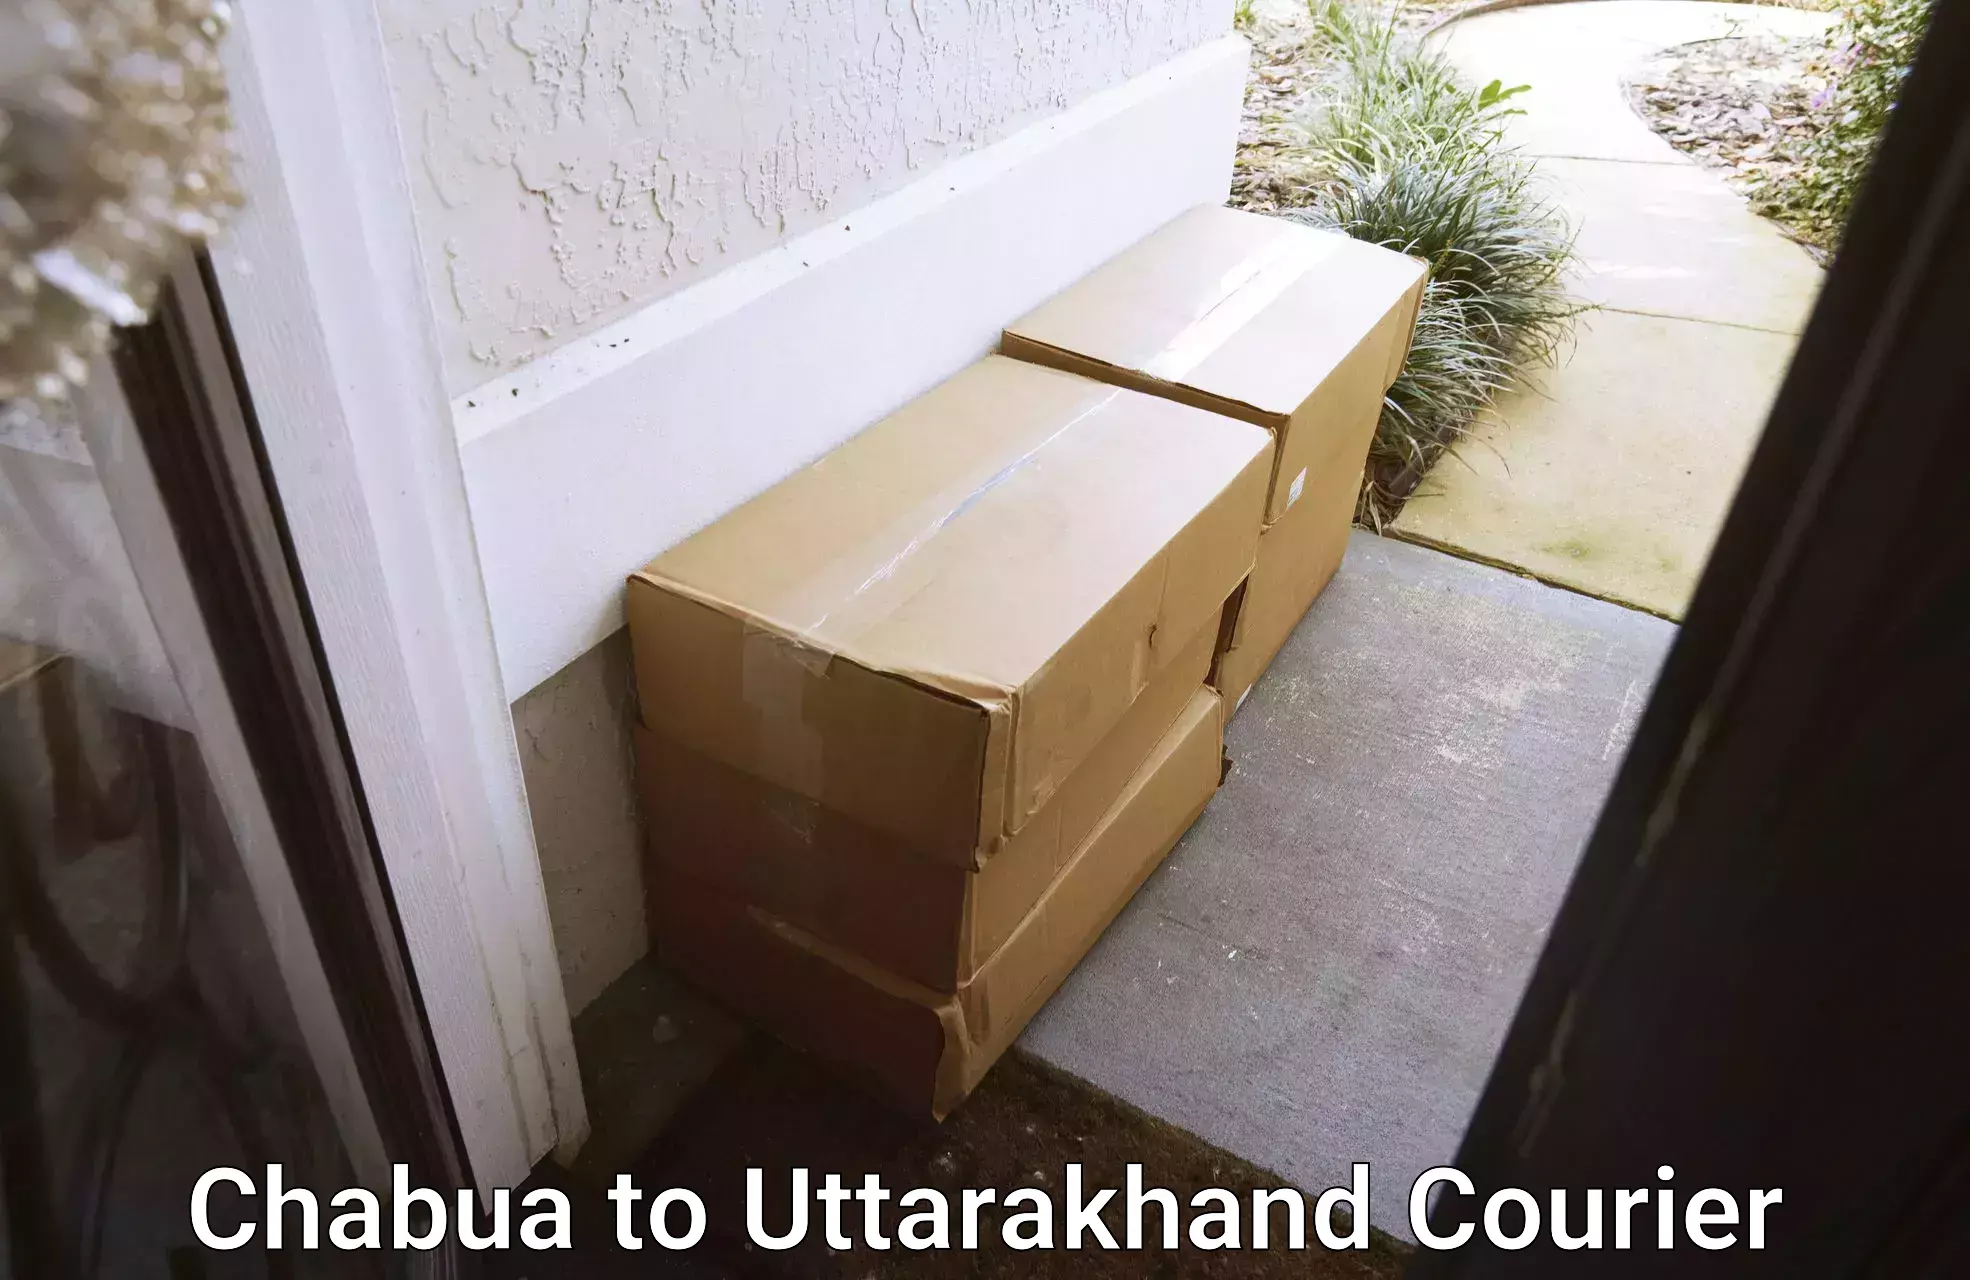 Round-the-clock parcel delivery in Chabua to Gopeshwar